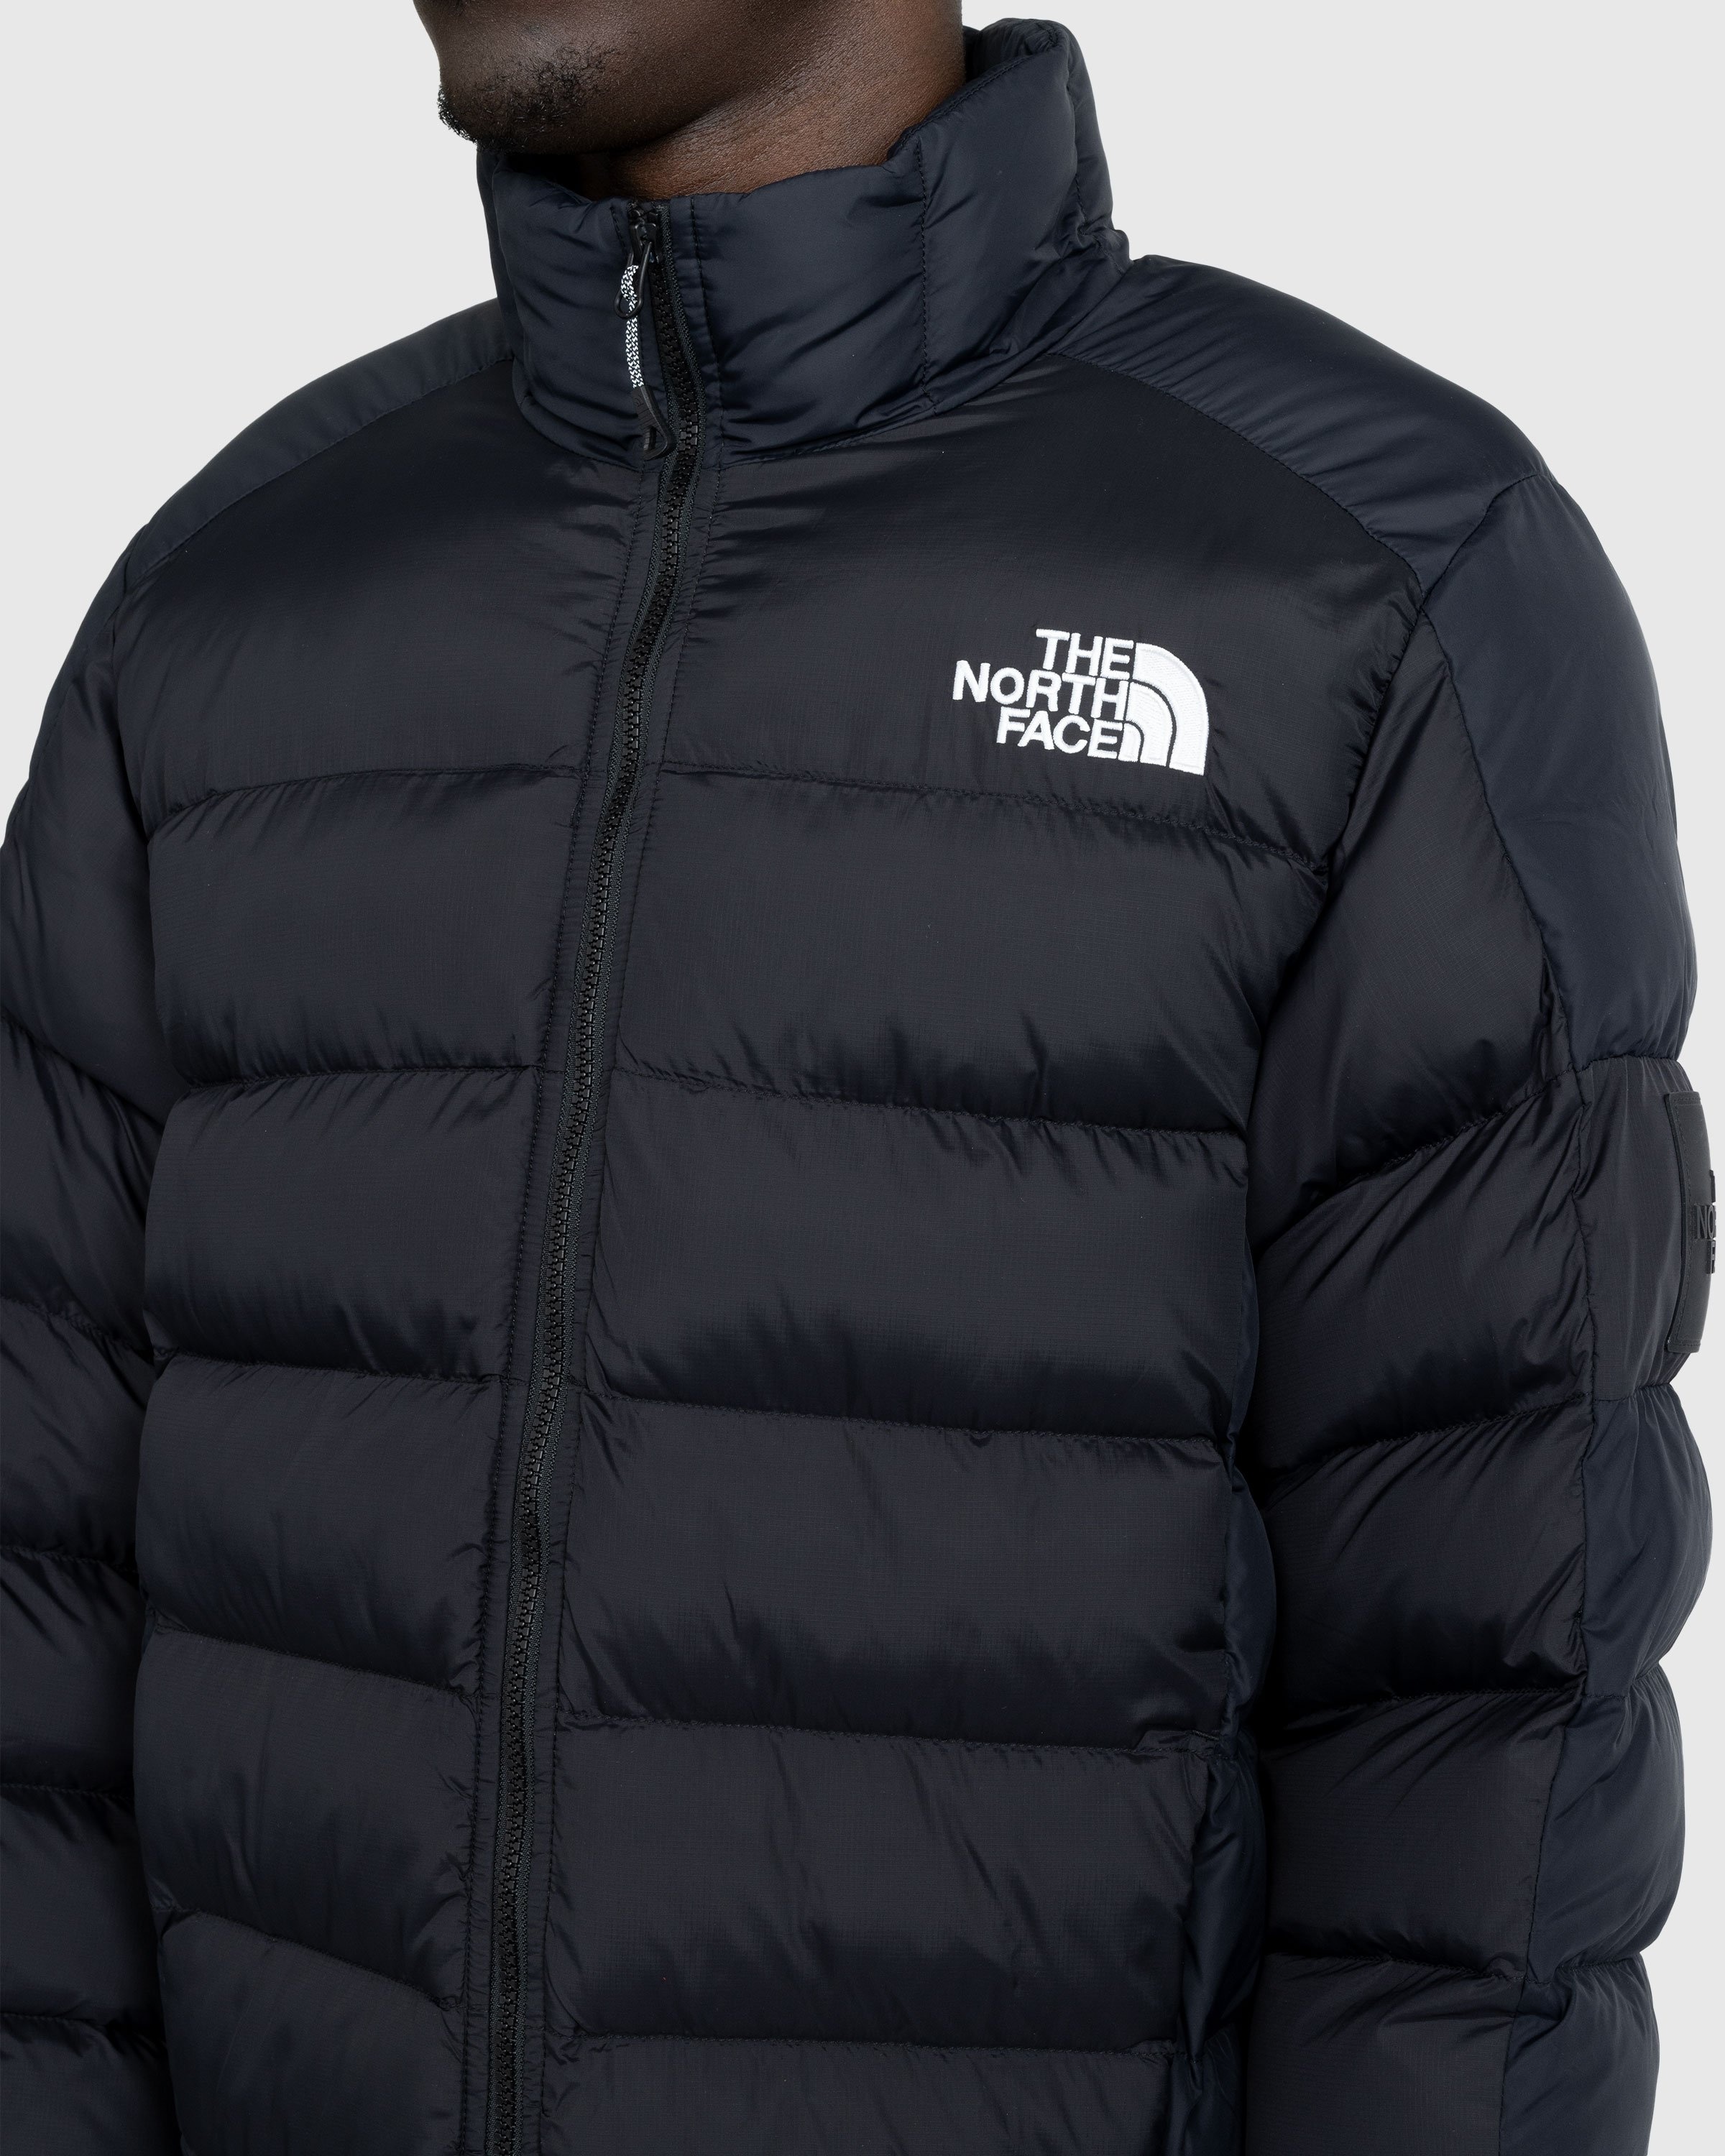 The North Face – Rusta 2.0 Puffer Jacket Black - Outerwear - Black - Image 5